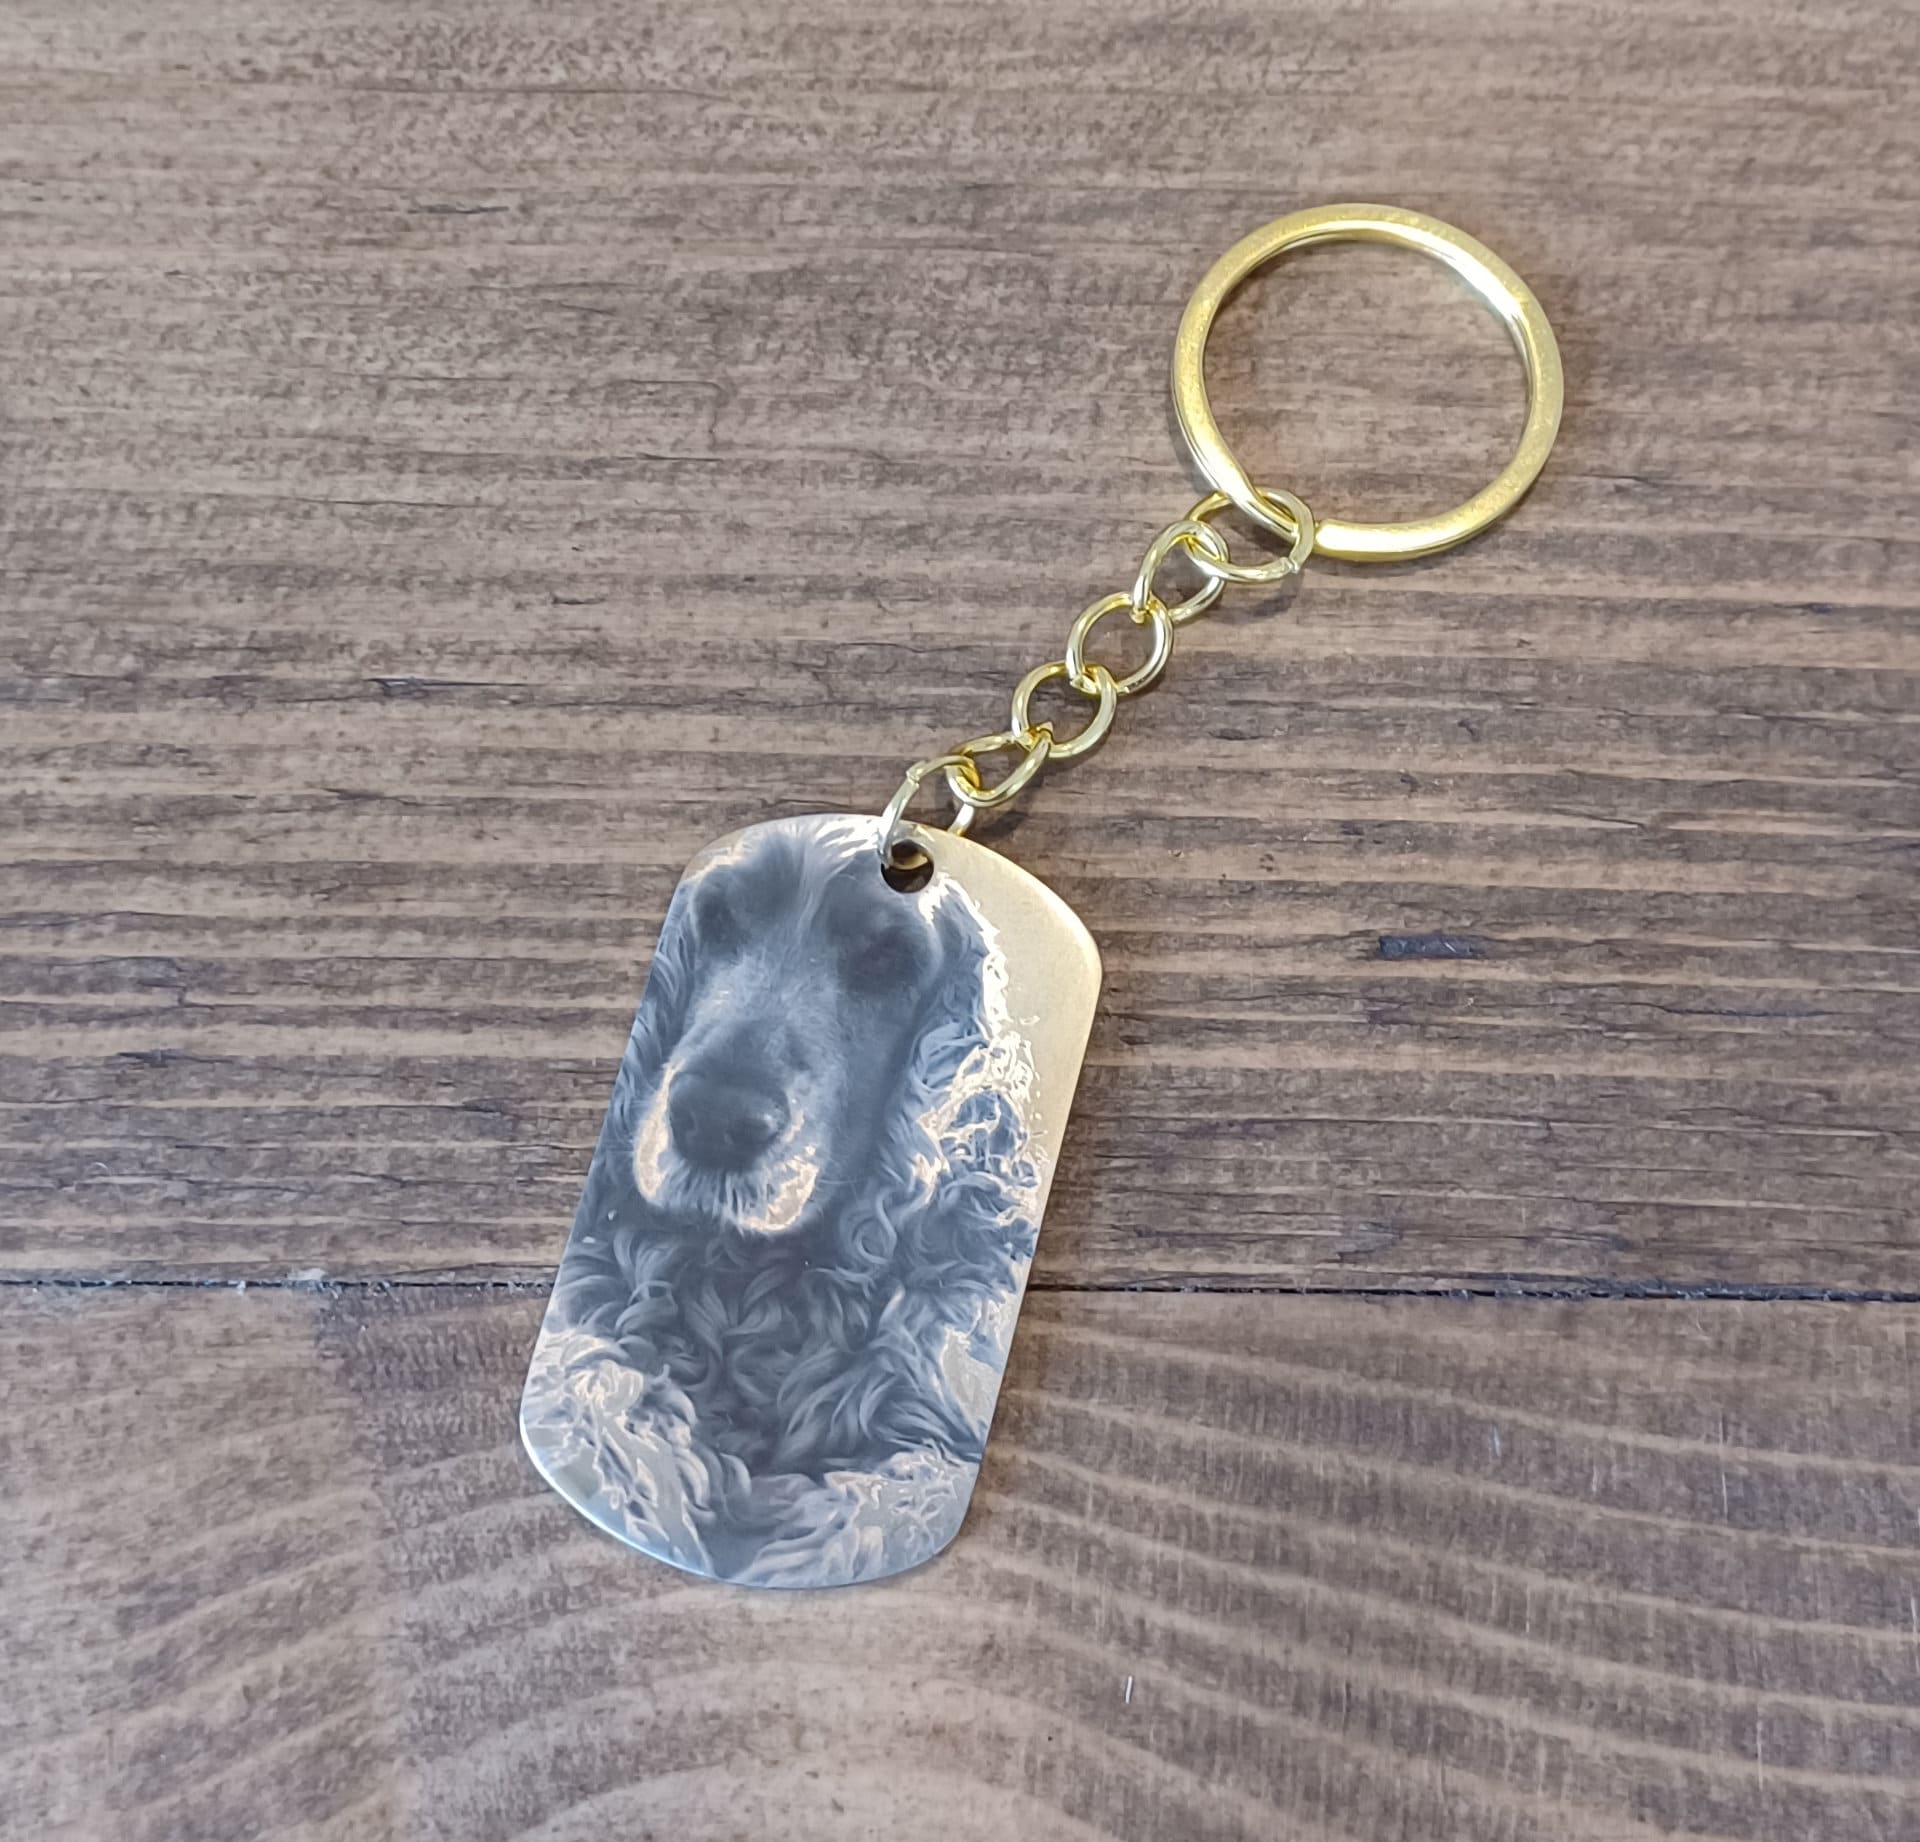 Laser Photo Engraved Stainless Steel Keyring. High Quality Photo